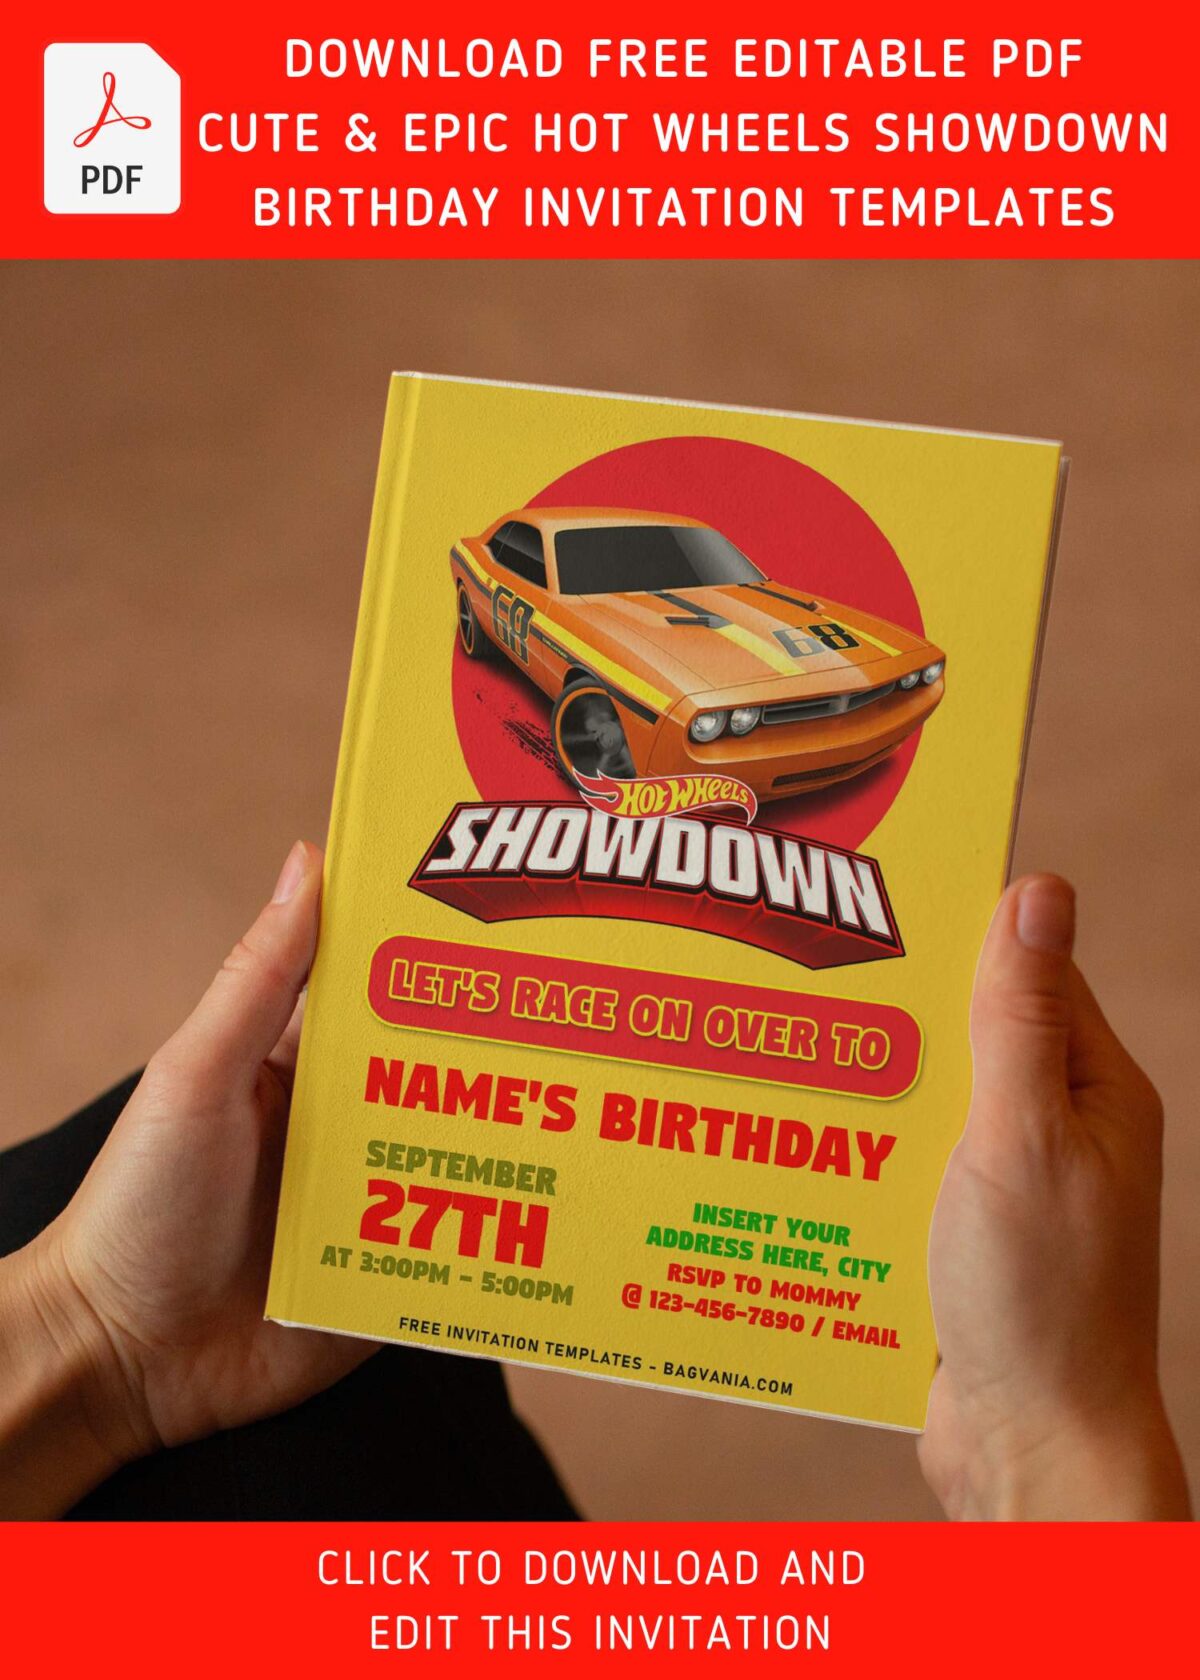 (Free Editable PDF) Race With The Winner Hot Wheels Birthday Invitation Templates with cute red accent